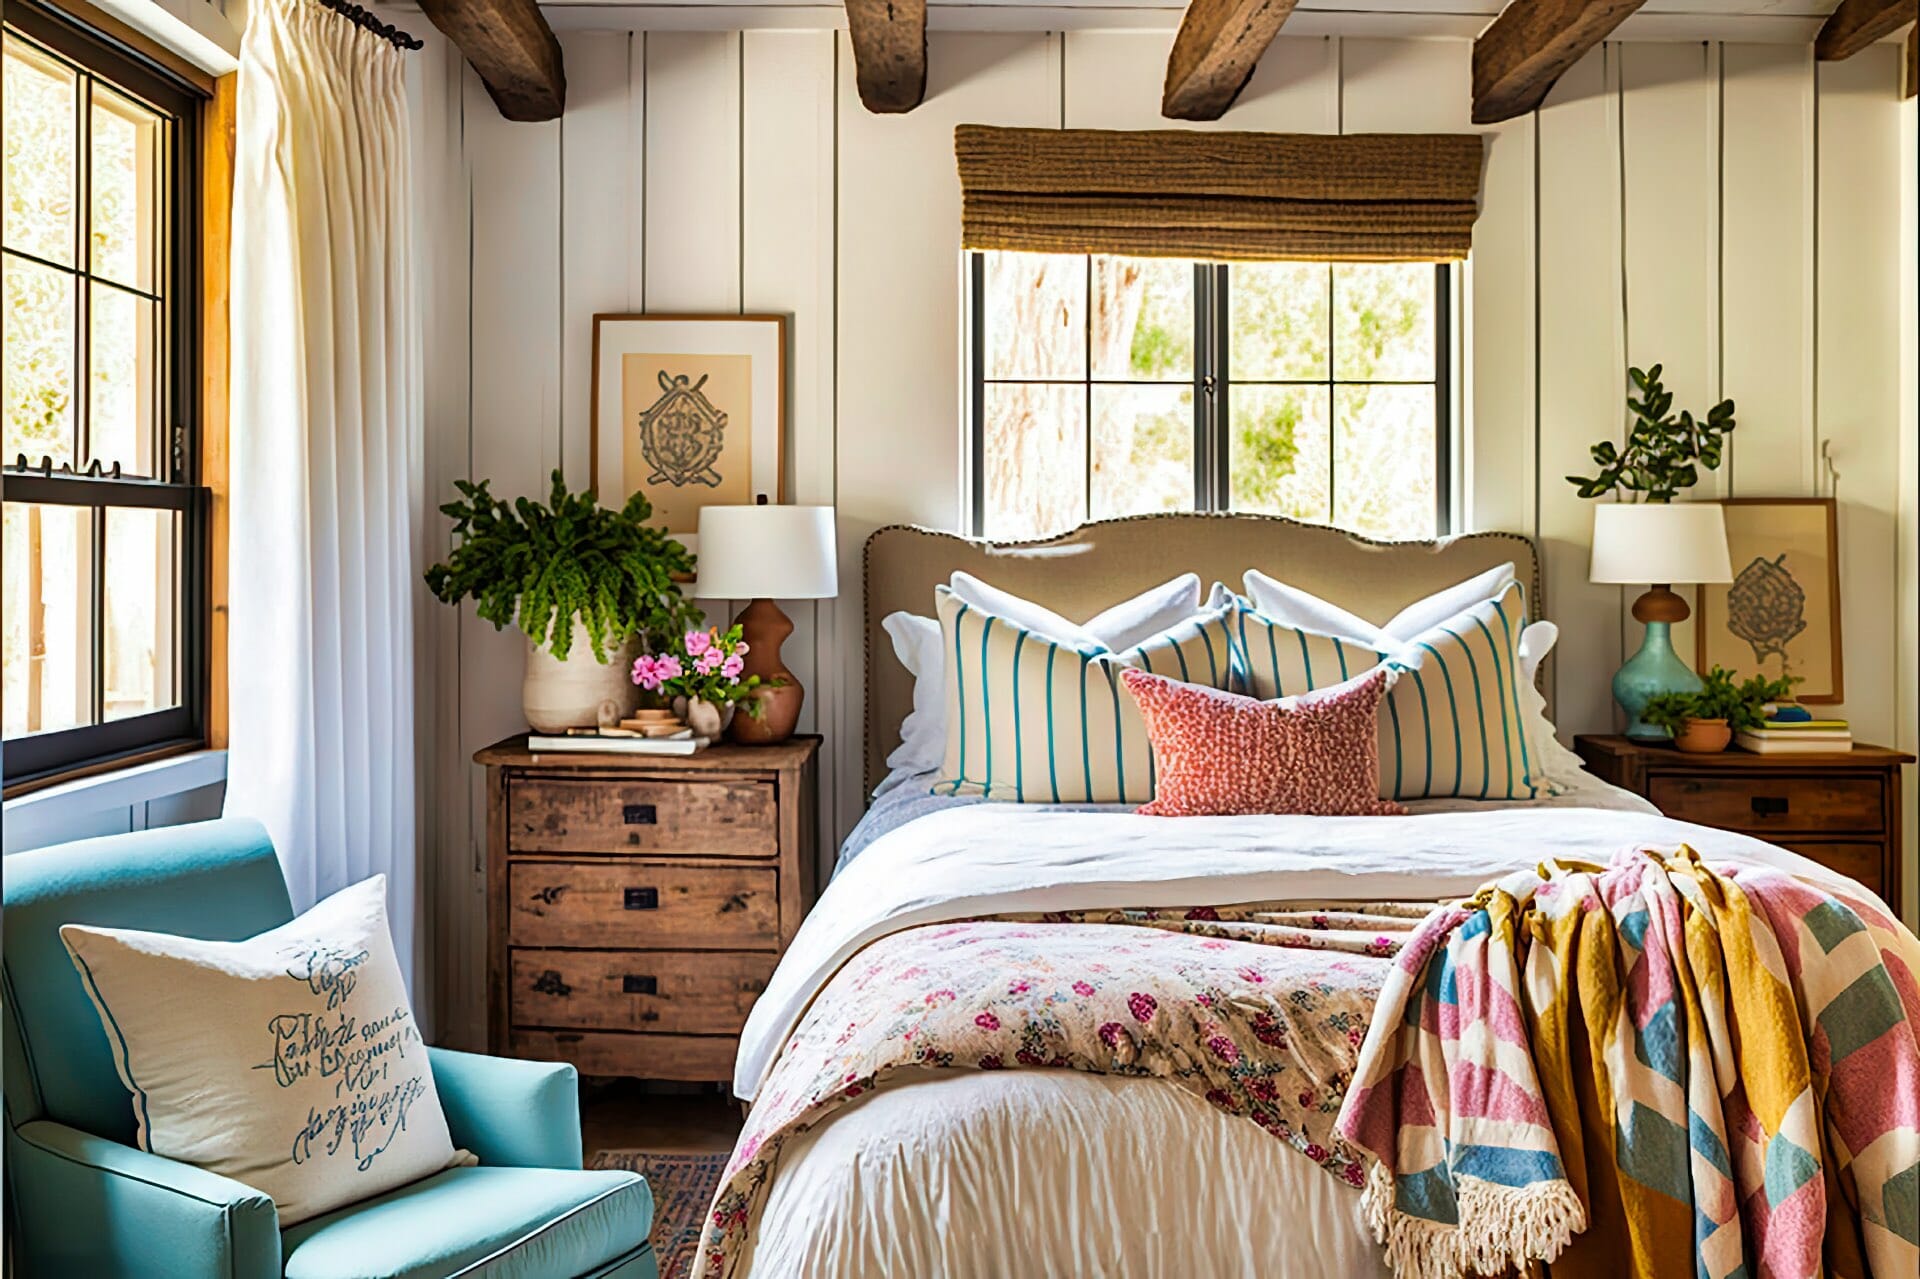 Cottage Style Bedroom With A Charming And Rustic Feel, Thanks To The Exposed Beam Ceiling And Rough Hewn Wood Paneled Walls. A Queen Size Bed With A Simple Wood Headboard Is Dressed In A Cozy White Comforter, And A Collection Of Patterned Throw Pillows Add A Pop Of Color. A Matching Wood Nightstand With A Brass Lamp Sits Beside The Bed, And A Comfy Armchair In A Neutral Fabric Provides A Relaxing Seating Option. A Braided Rug In Shades Of Blue And White Anchors The Space, And A Collection Of Framed Vintage Maps Adds A Touch Of History.